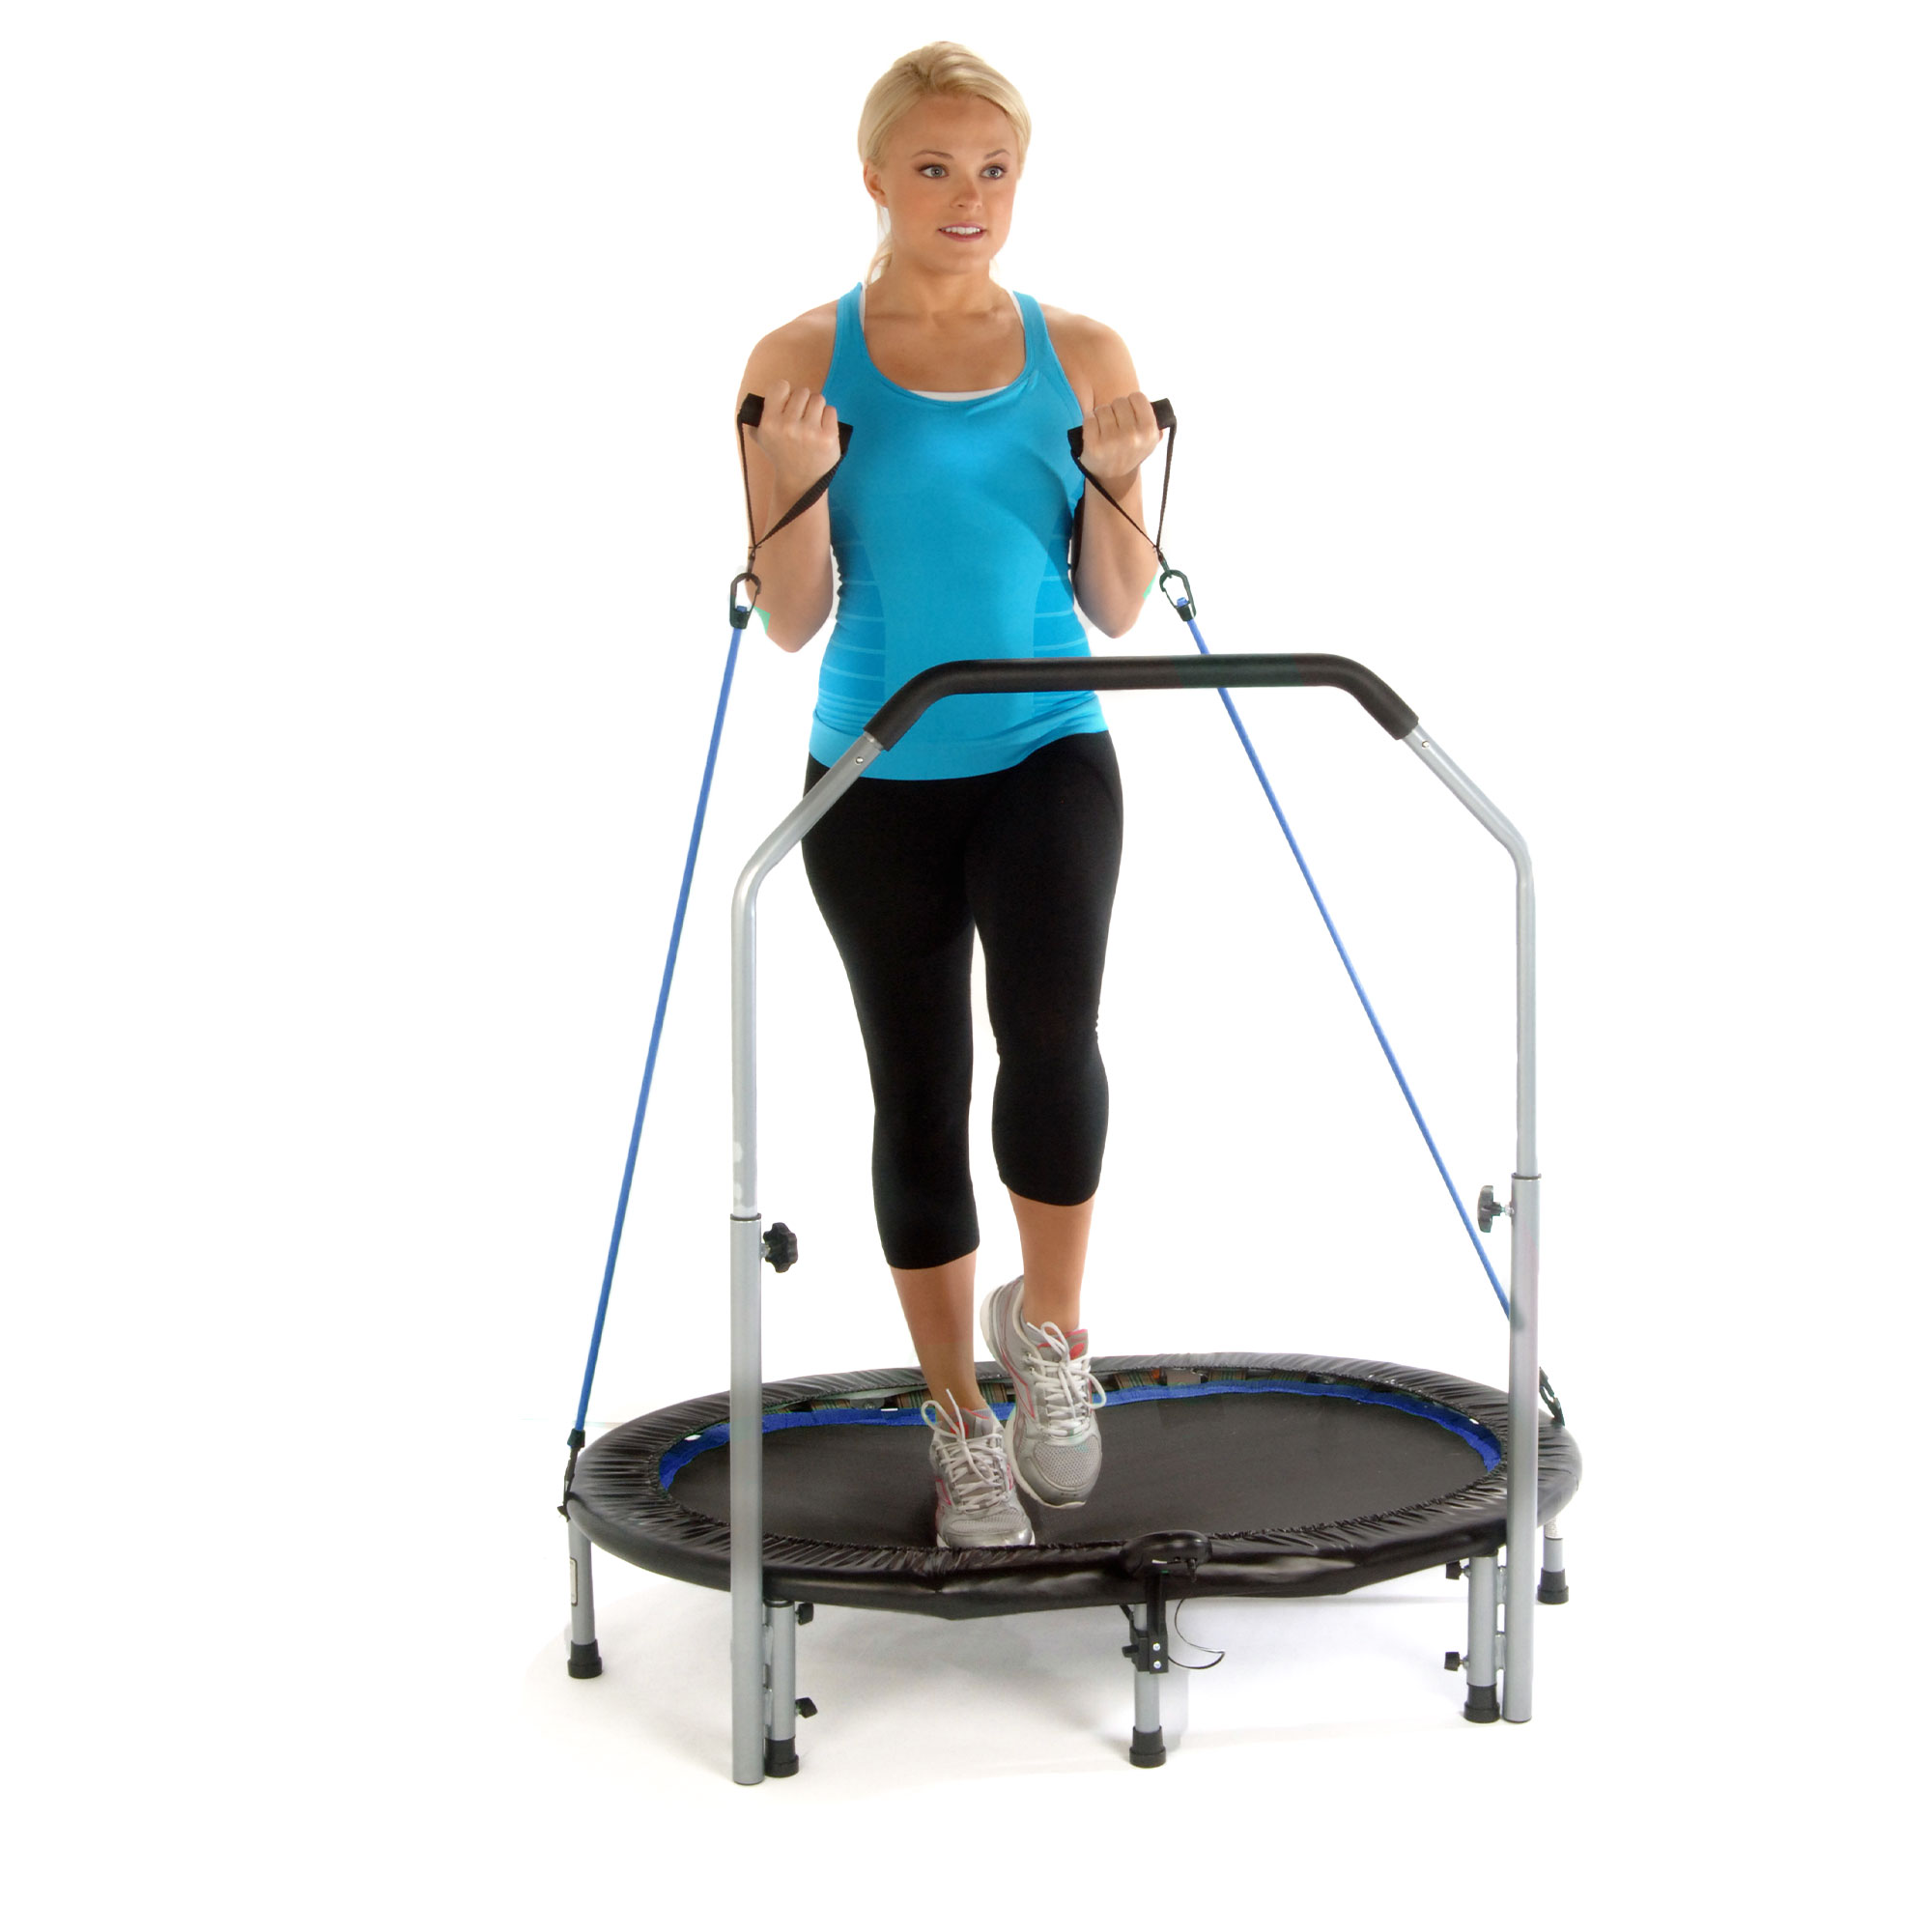 Stamina InTone Oval Fitness Rebounder Trampoline with Handlebars, White - image 3 of 8